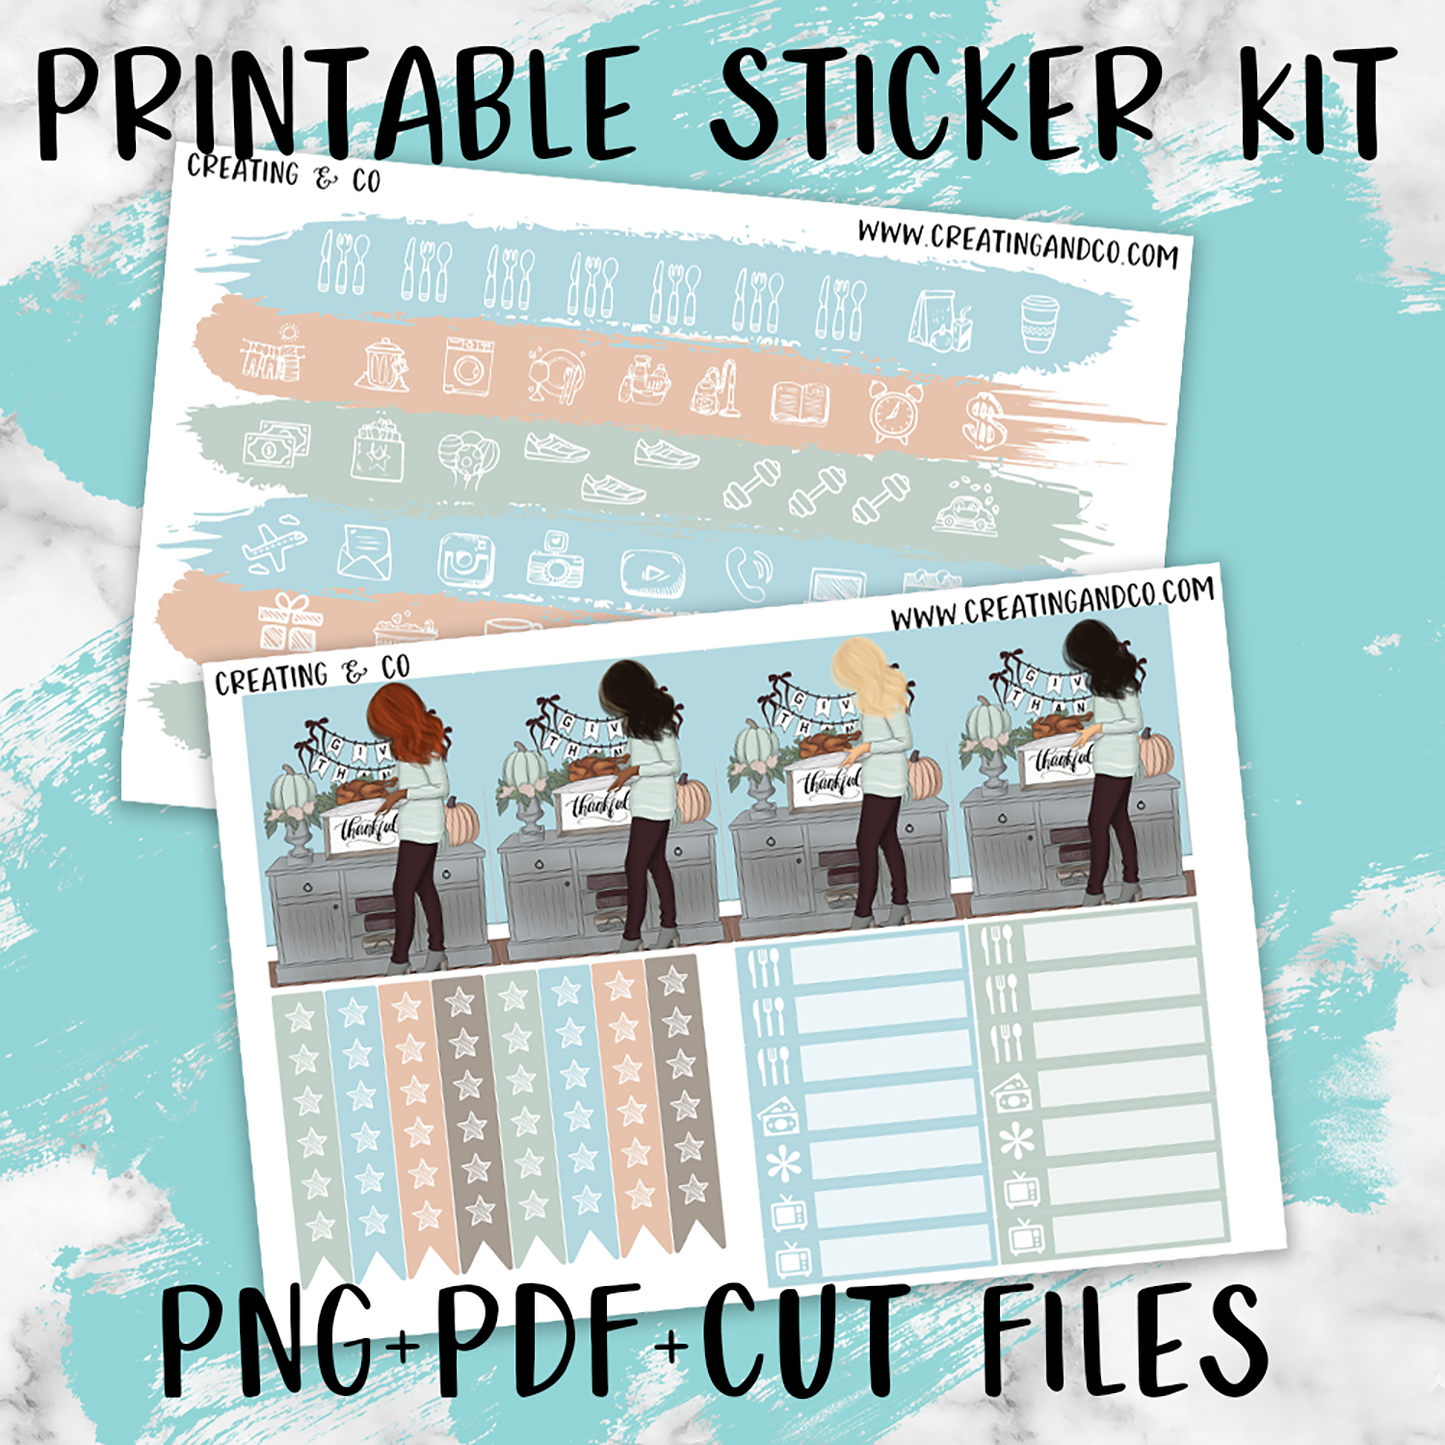 Gather Printable Weekly Planner Stickers - PK2